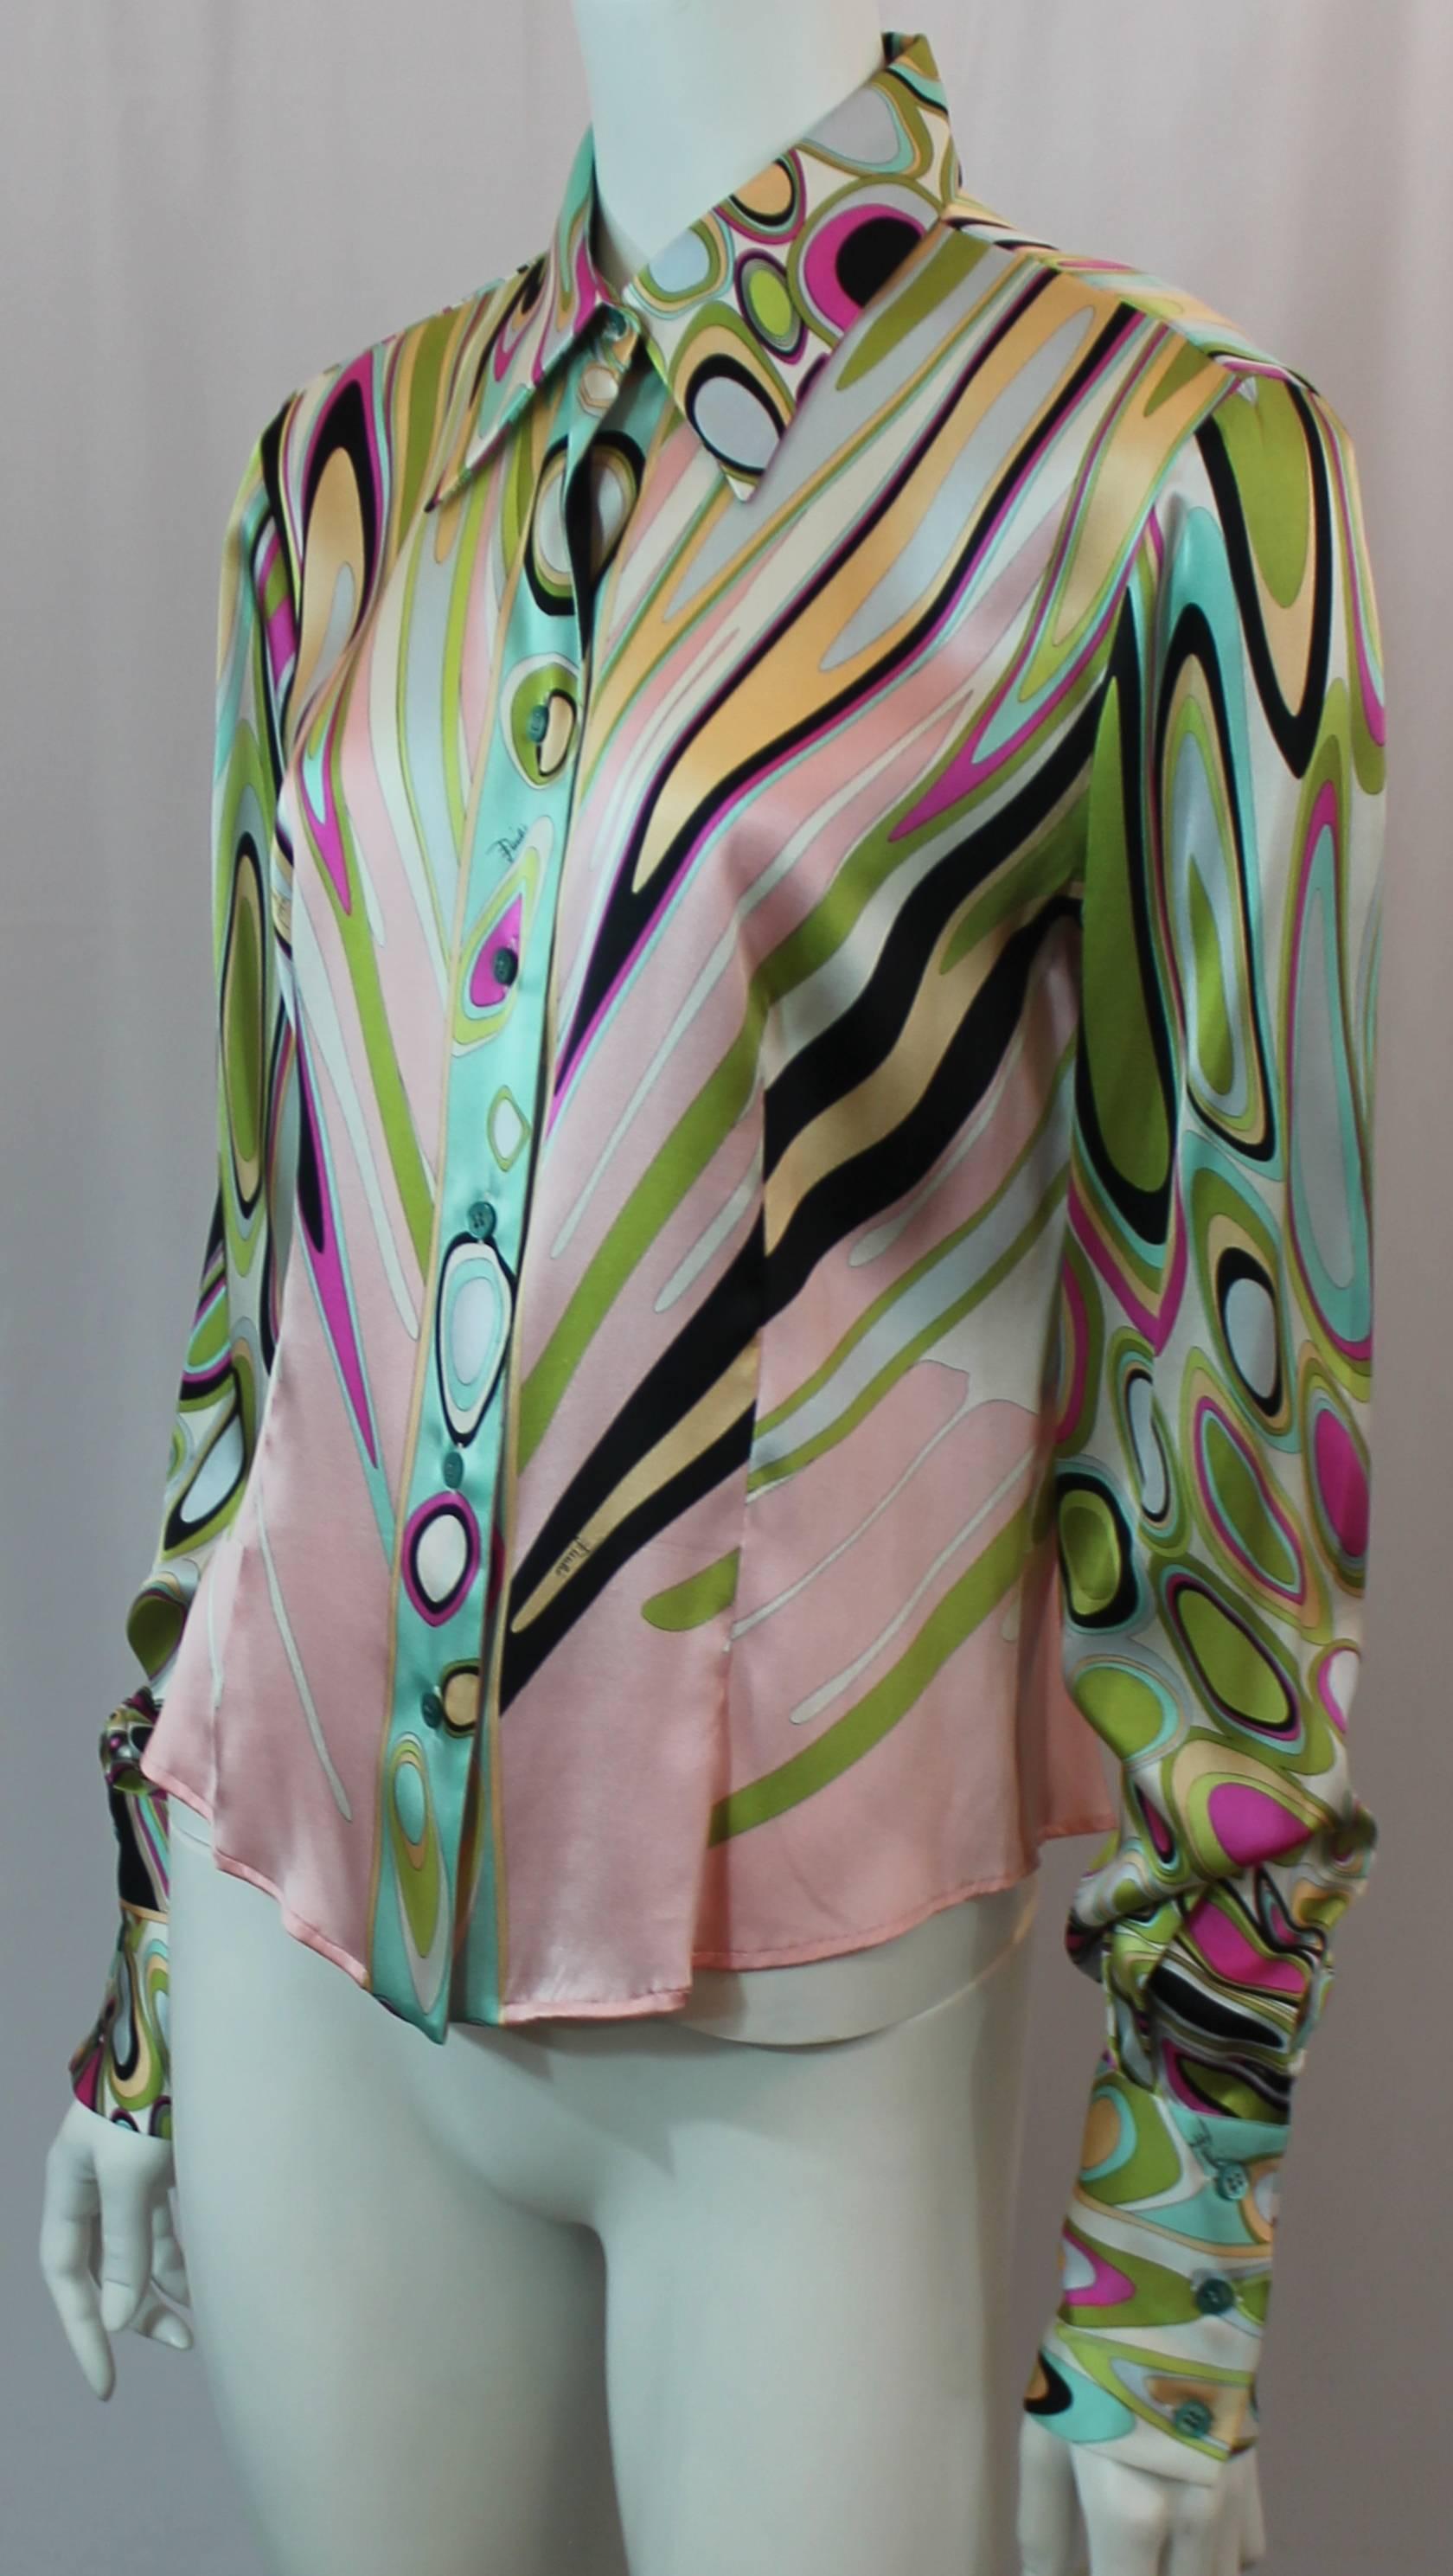 Emilio Pucci Multi-Colored Silk Shimmery Printed Long Sleeve Button Down Shirt - 12. This fun shirt is silk and has a shimmery geometric design with many colors suck as pinks, blue, green, and black. It is in excellent